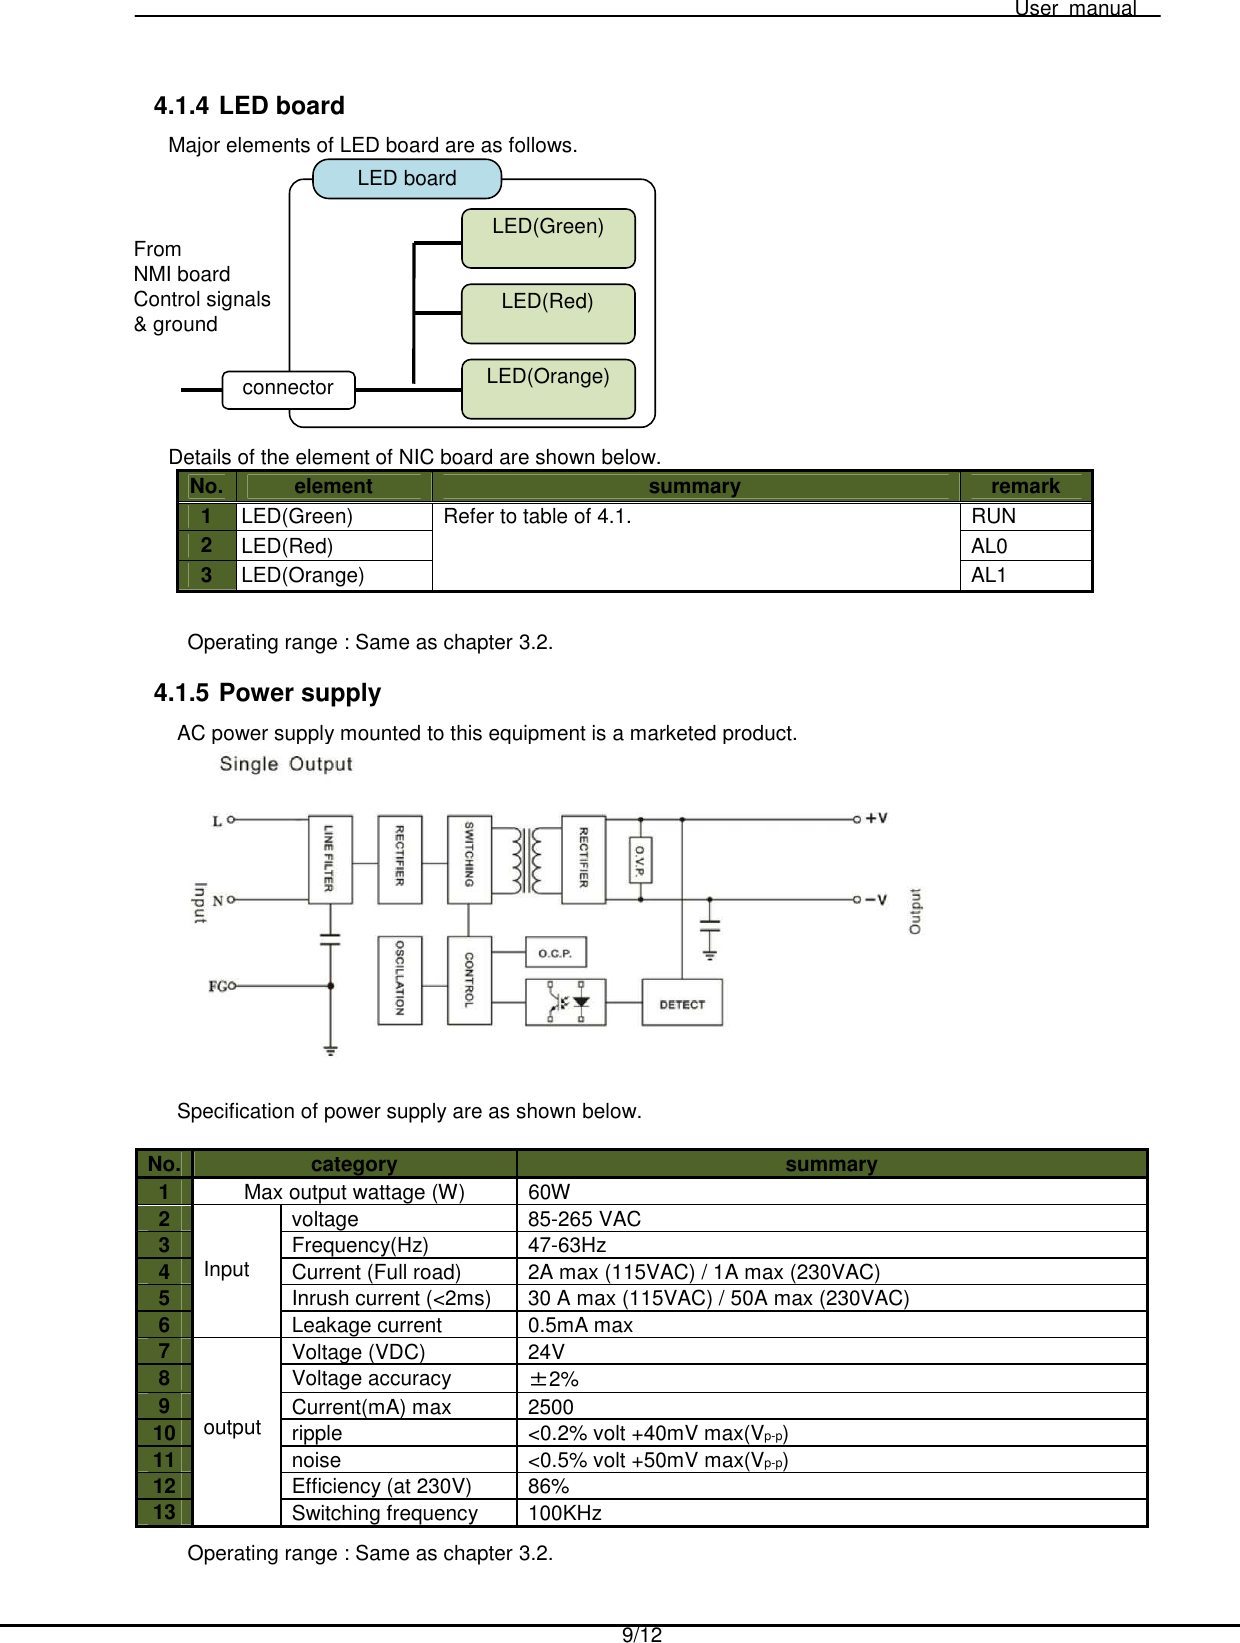   User  manual  9/12   4.1.4 LED board Major elements of LED board are as follows.             Details of the element of NIC board are shown below. No. element  summary  remark 1 LED(Green)  Refer to table of 4.1.  RUN 2 LED(Red)  AL0 3 LED(Orange)  AL1  Operating range : Same as chapter 3.2.  4.1.5 Power supply AC power supply mounted to this equipment is a marketed product.   Specification of power supply are as shown below.  No. category  summary 1  Max output wattage (W)  60W 2    Input voltage  85-265 VAC 3  Frequency(Hz)  47-63Hz 4  Current (Full road)  2A max (115VAC) / 1A max (230VAC) 5  Inrush current (&lt;2ms)  30 A max (115VAC) / 50A max (230VAC) 6  Leakage current  0.5mA max 7     output Voltage (VDC)  24V 8  Voltage accuracy  ±2% 9  Current(mA) max  2500 10 ripple  &lt;0.2% volt +40mV max(Vp-p) 11 noise  &lt;0.5% volt +50mV max(Vp-p) 12 Efficiency (at 230V)  86% 13 Switching frequency  100KHz Operating range : Same as chapter 3.2. From   NMI board Control signals &amp; ground LED board connector LED(Orange) LED(Green) LED(Red) 